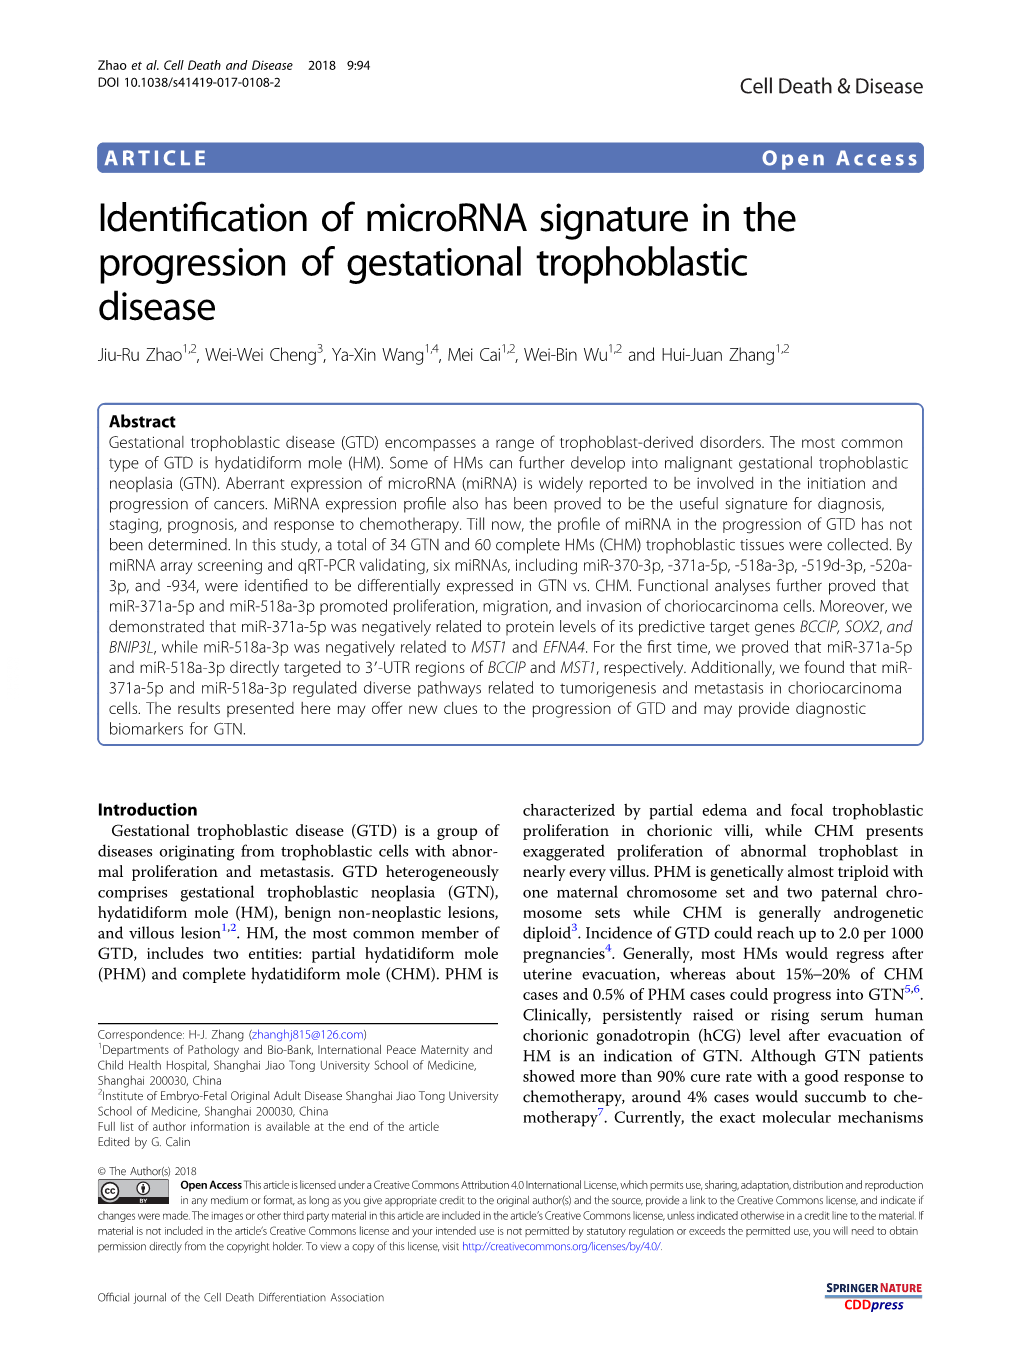 Identification of Microrna Signature in the Progression of Gestational